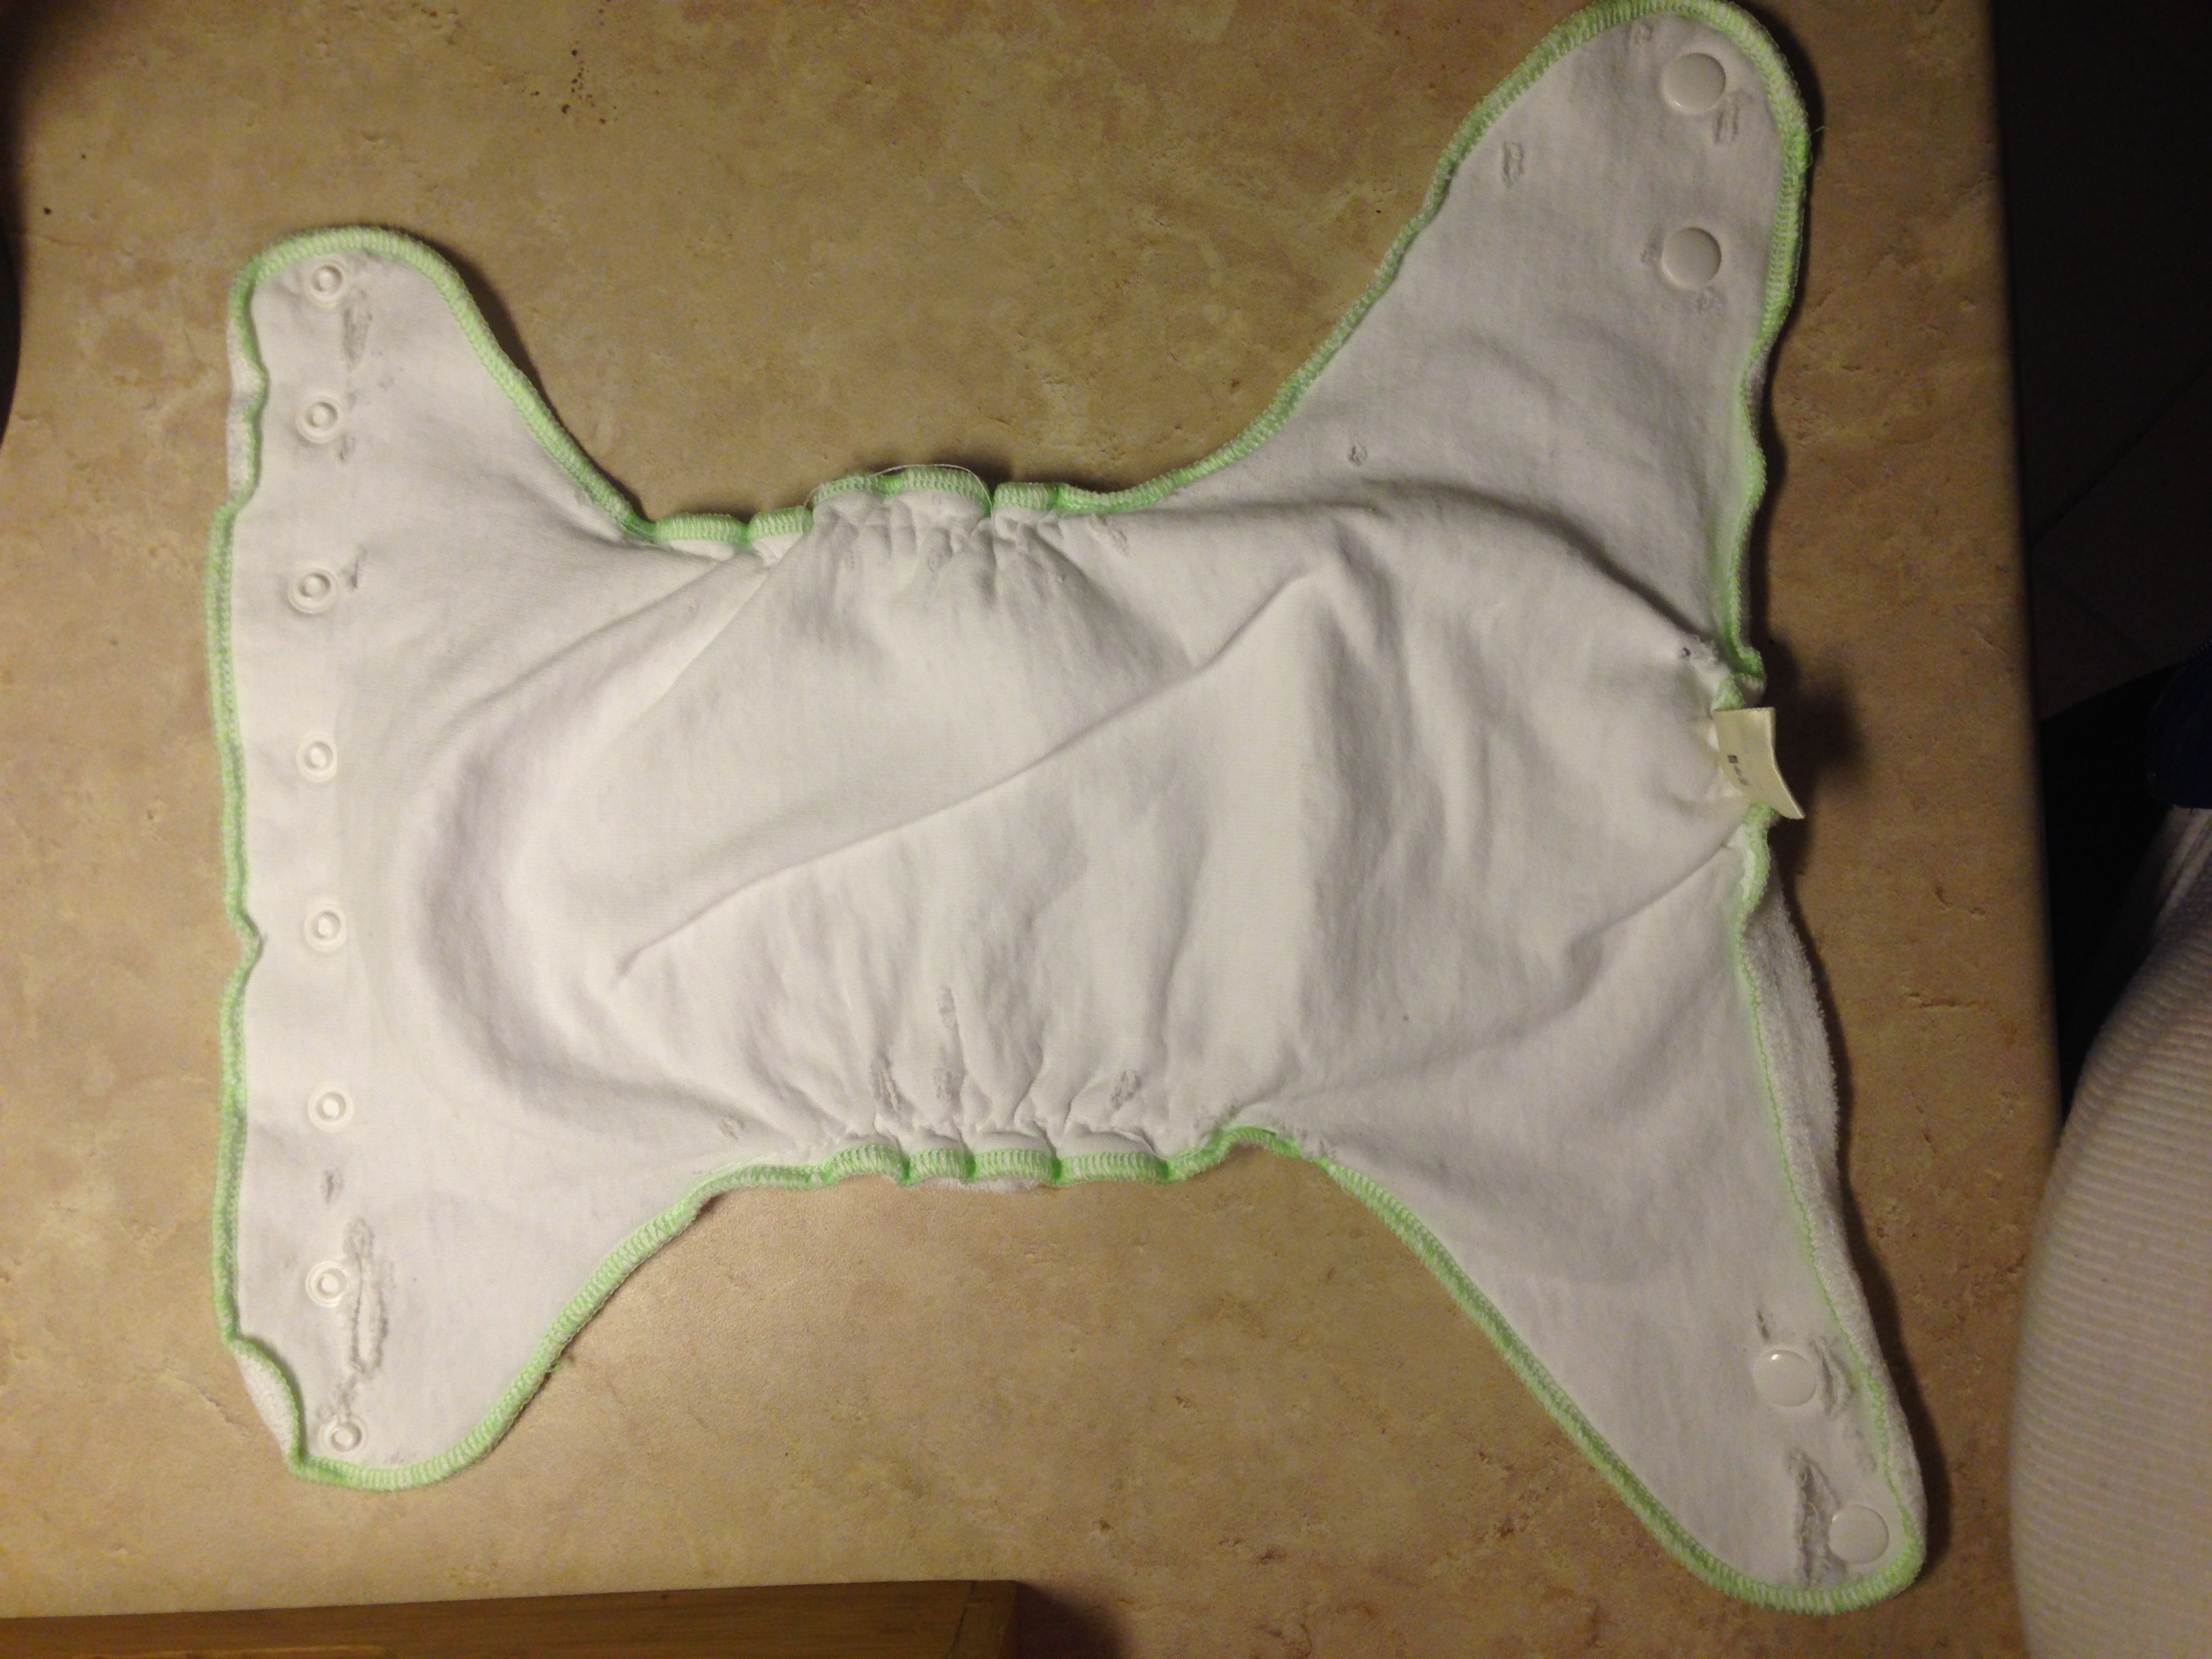 One of the diapers after two weeks of home use